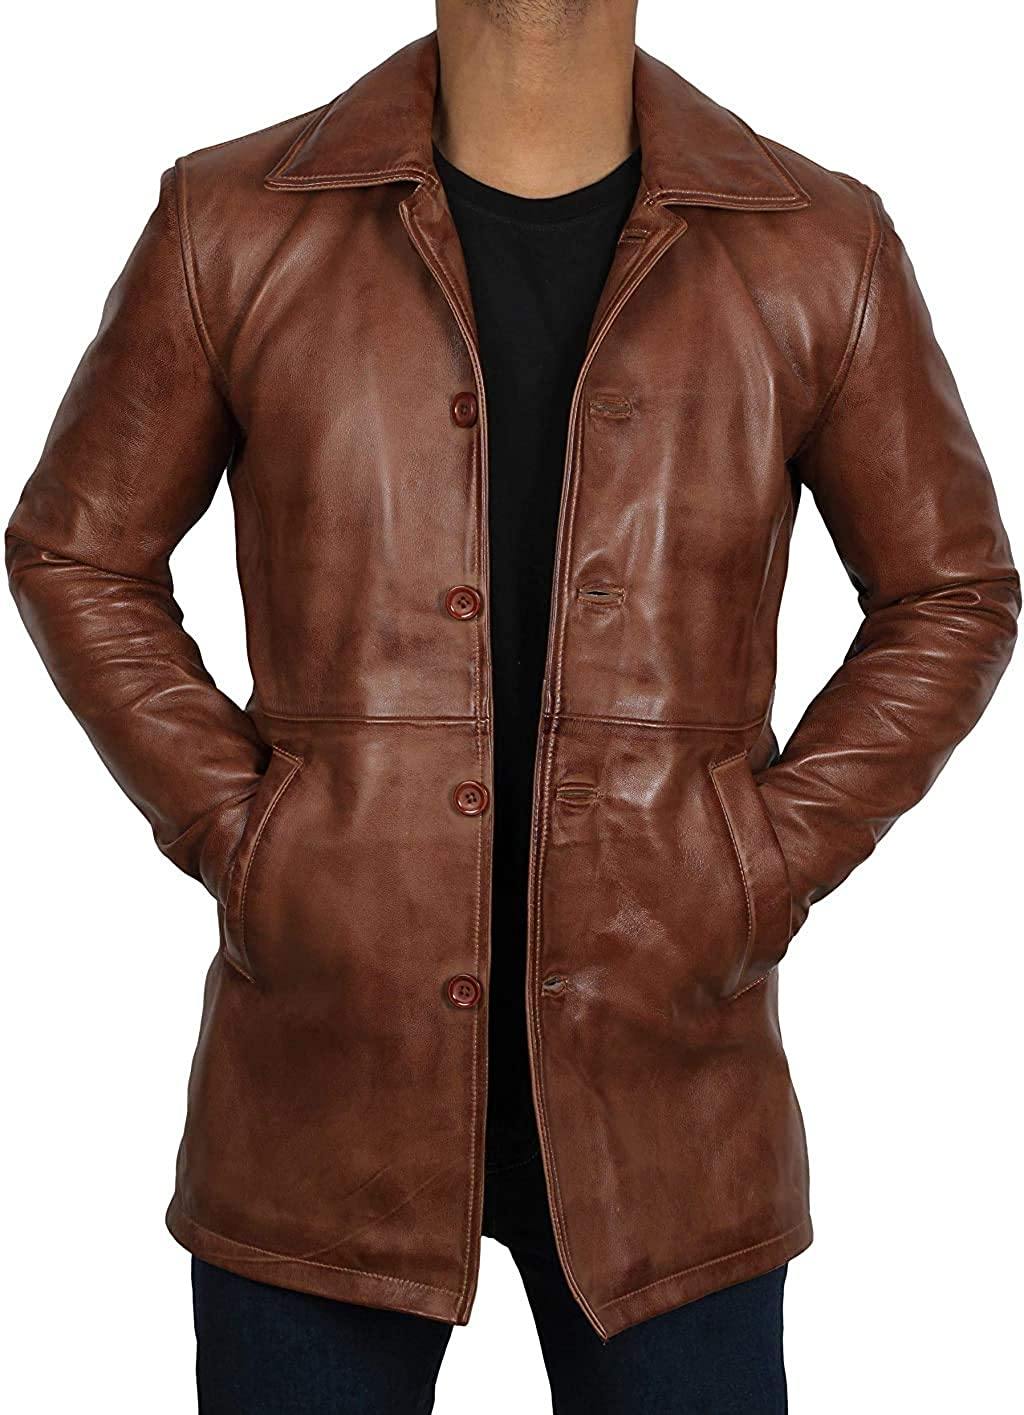 Distressed Brown Lambskin Leather Jacket for Men